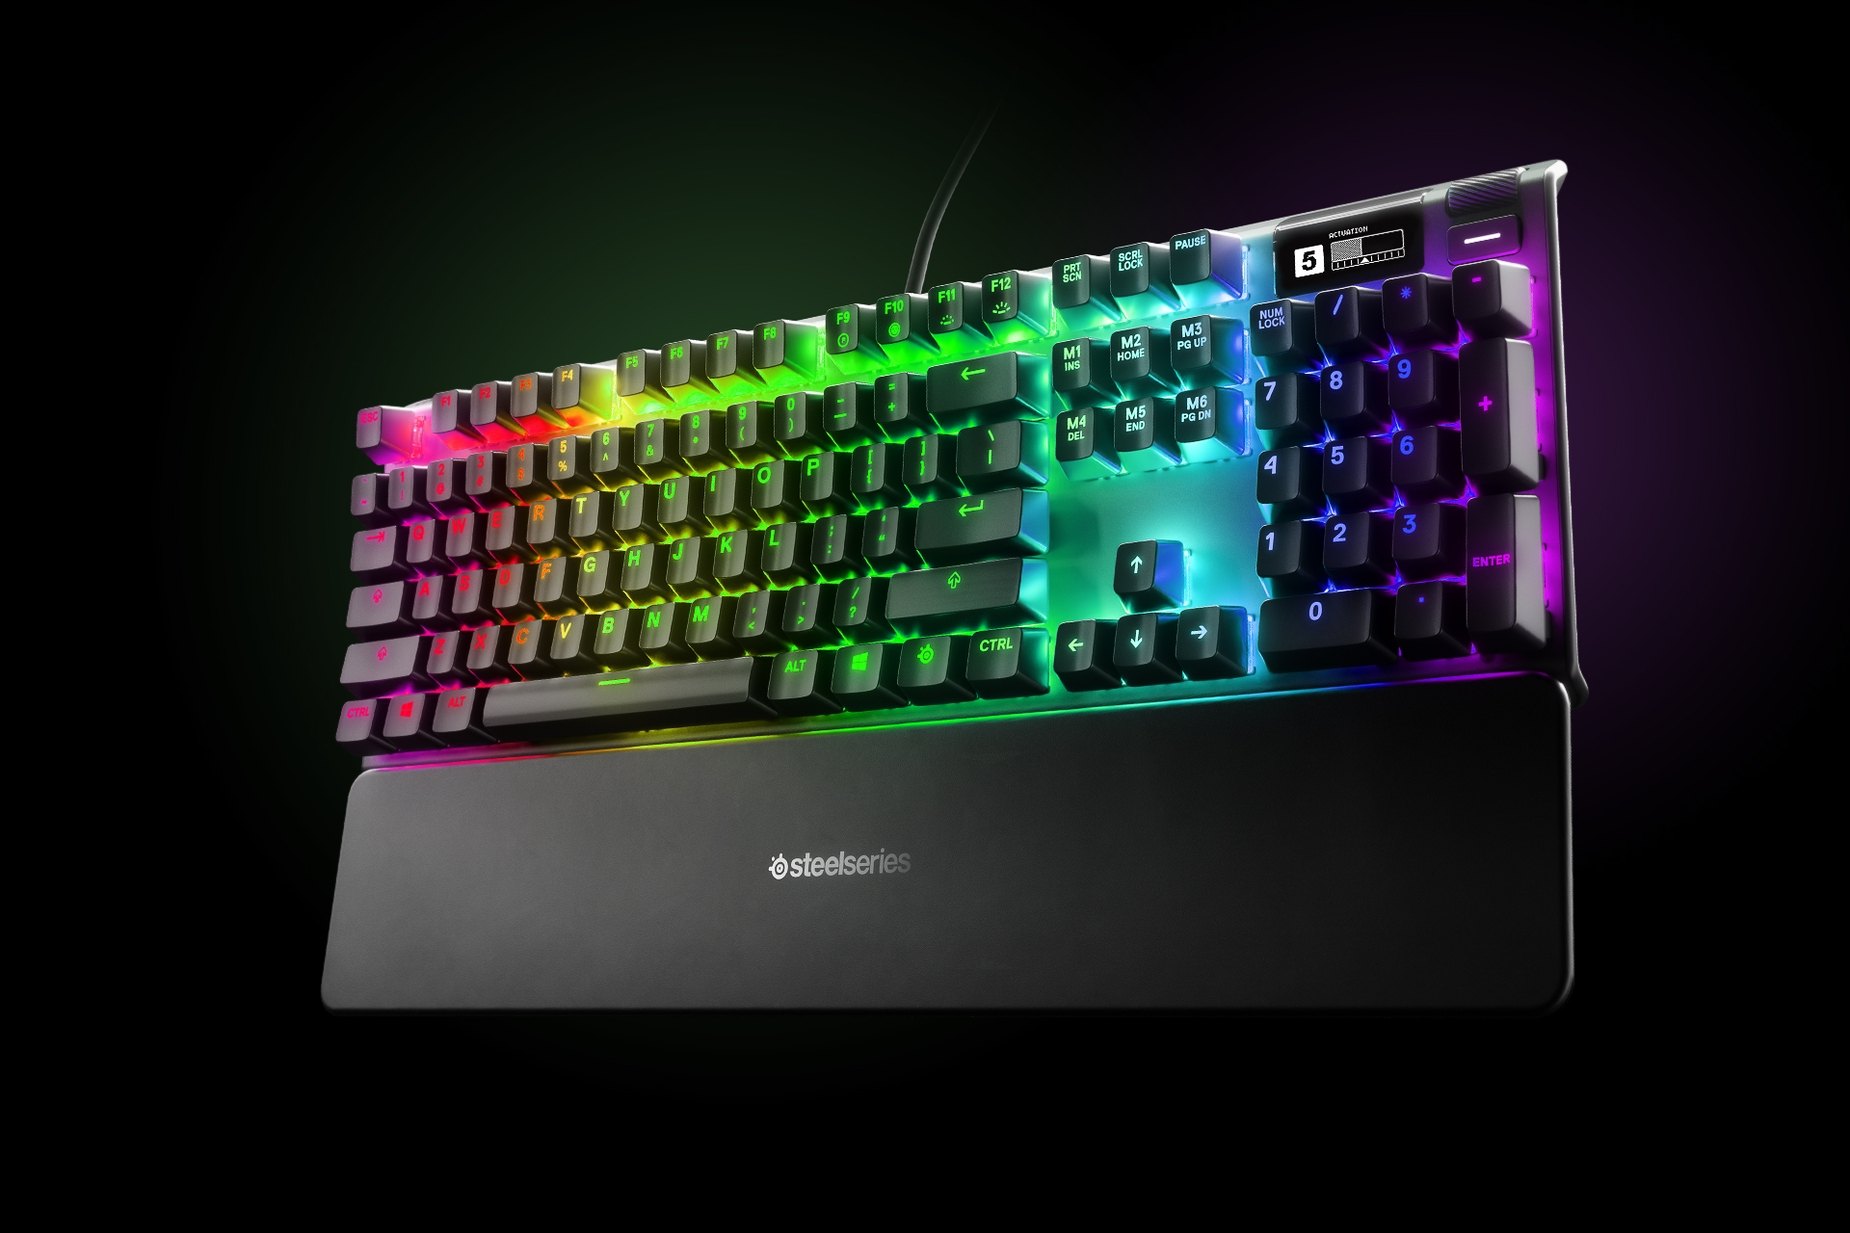 
 Thai - Apex Pro gaming keyboard with the illumination lit up on dark background, also shows the OLED screen and controls used to change settings, switch actuation, and adjust audio
 